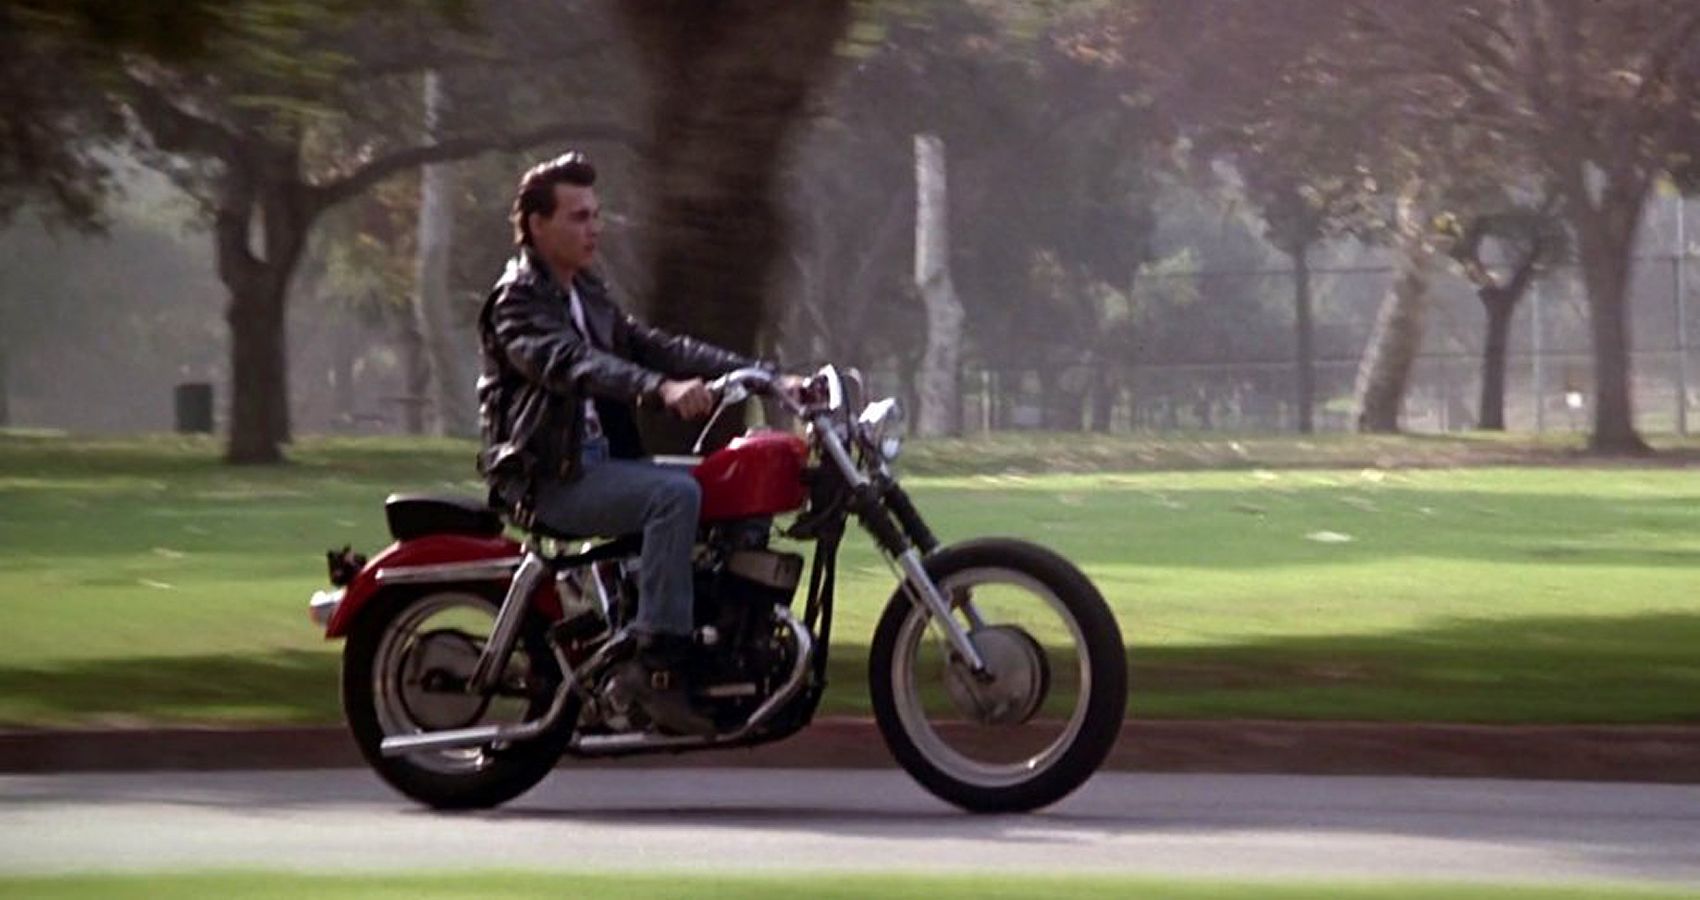 a picture of character 'Wade' on his motorcycle in the hit flick "Crybaby" (1990)